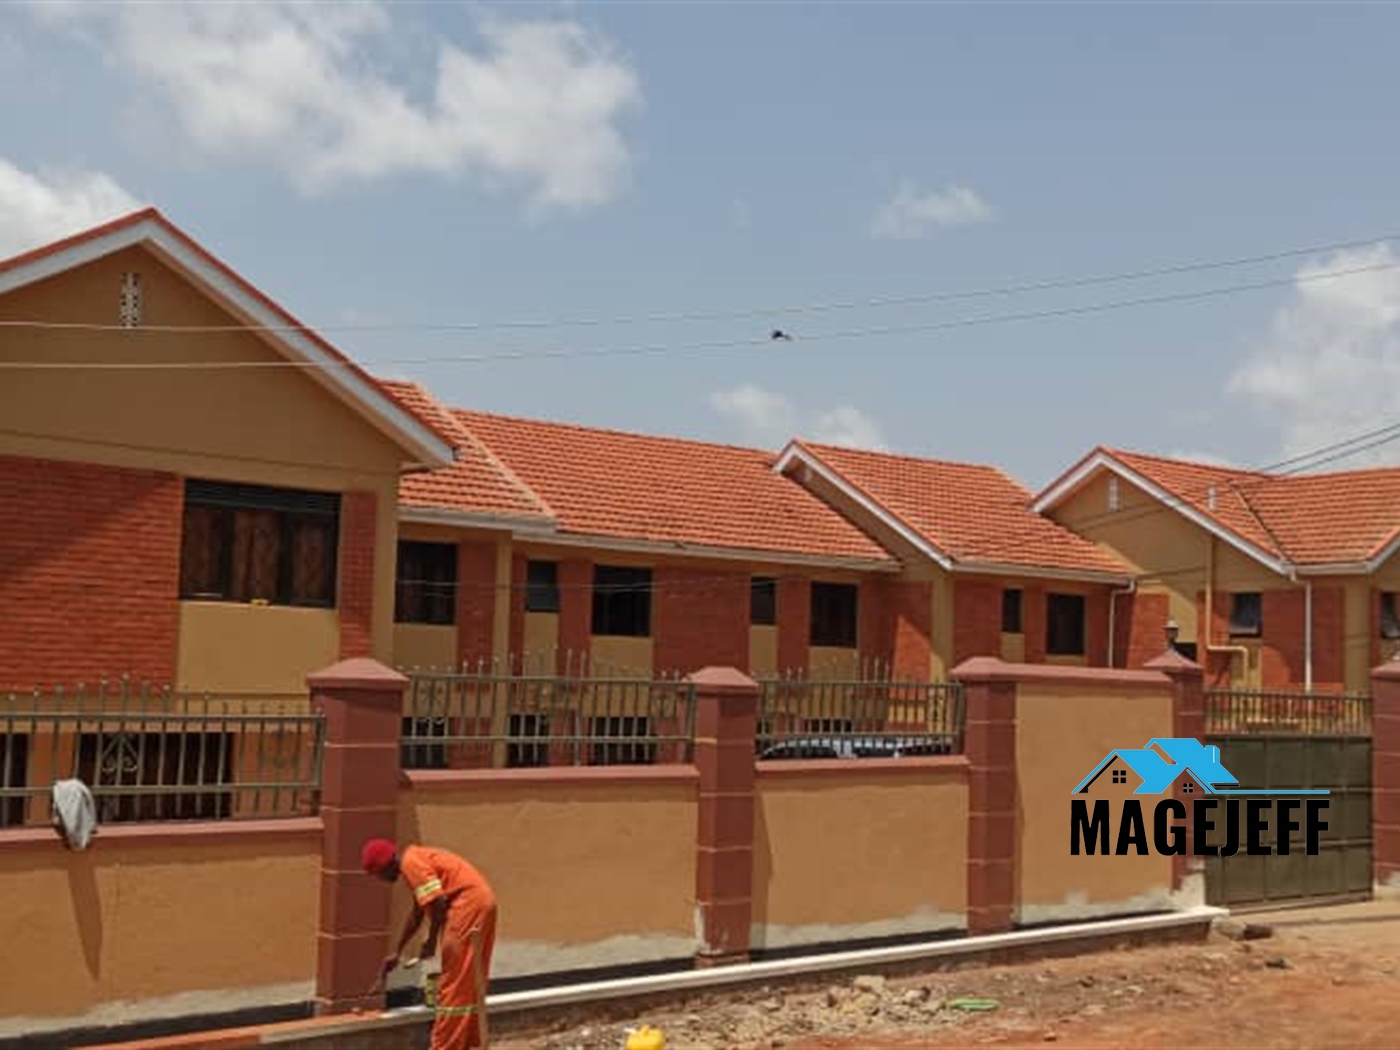 Apartment block for sale in Mutungo Kampala